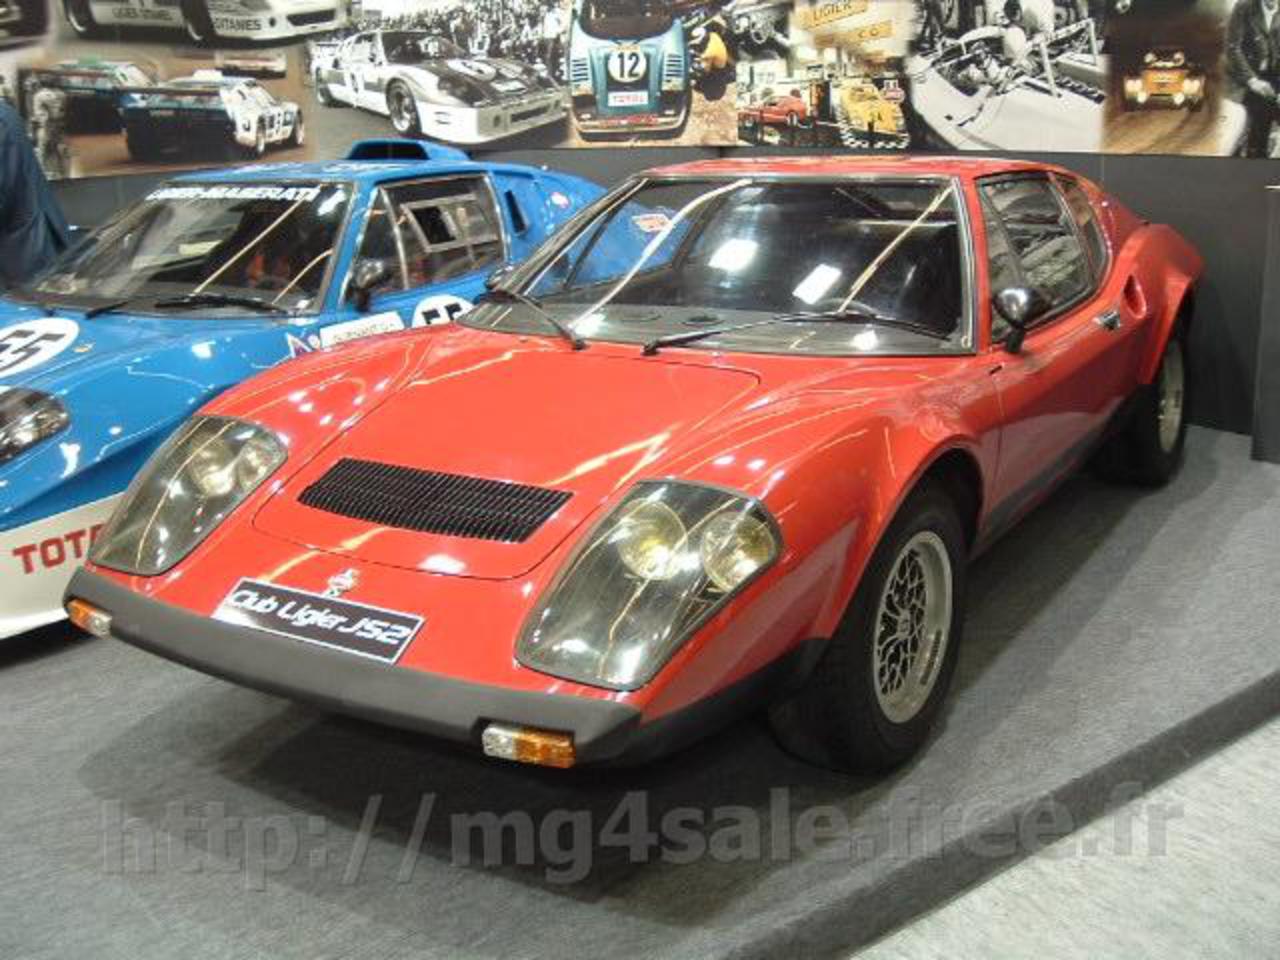 Our MG - Pictures from the Retromobile 2007 classic car show